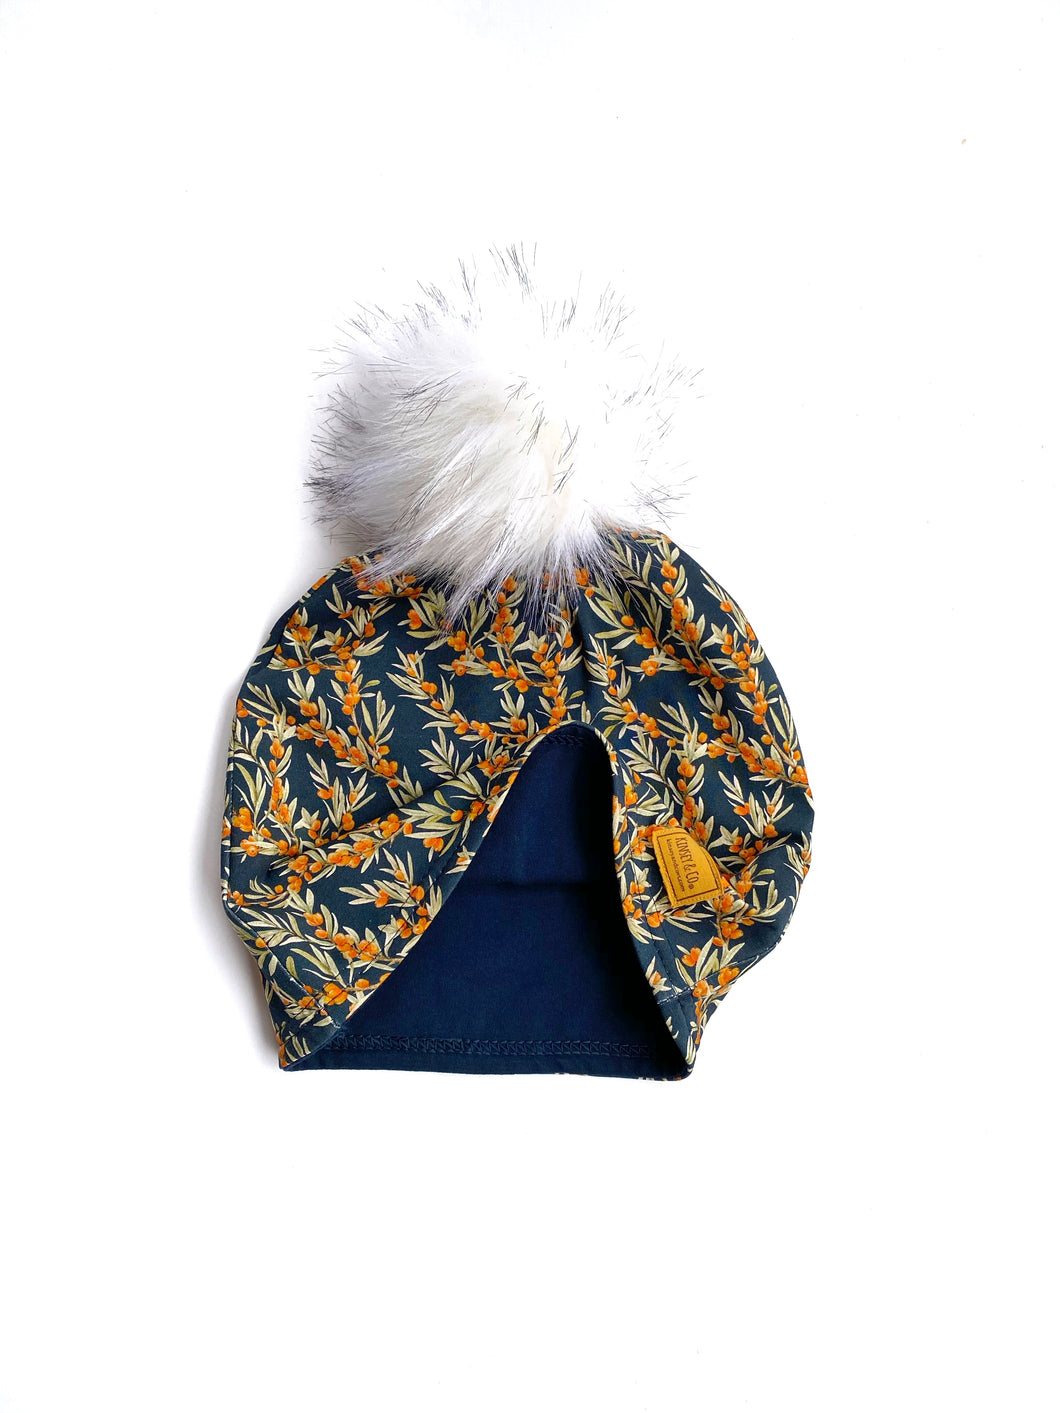 Adult Hat with Snap Pom Winterberry-Child Sizes Also Available